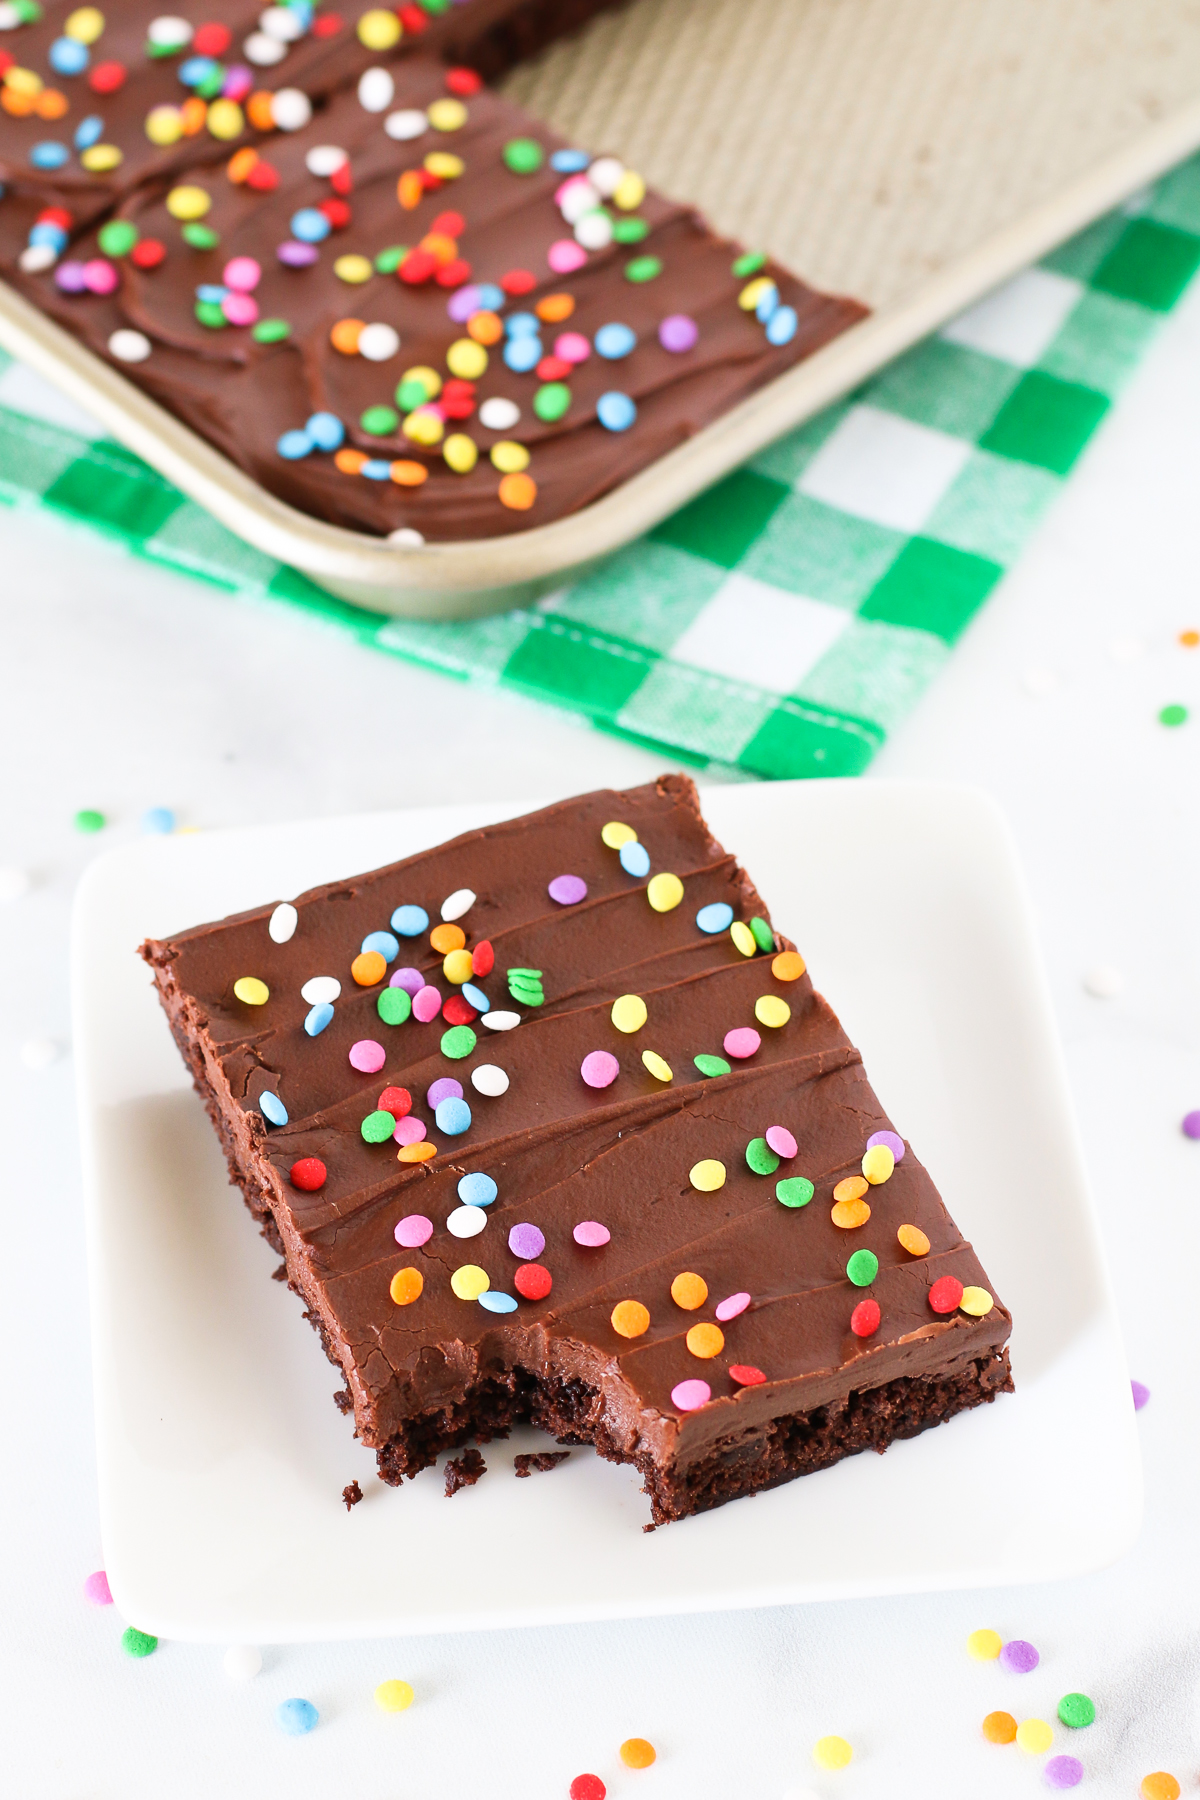 Gluten Free Vegan Chocolate Frosted Brownies. What could be better than a fudgy, chocolate frosted brownie with colorful sprinkles?